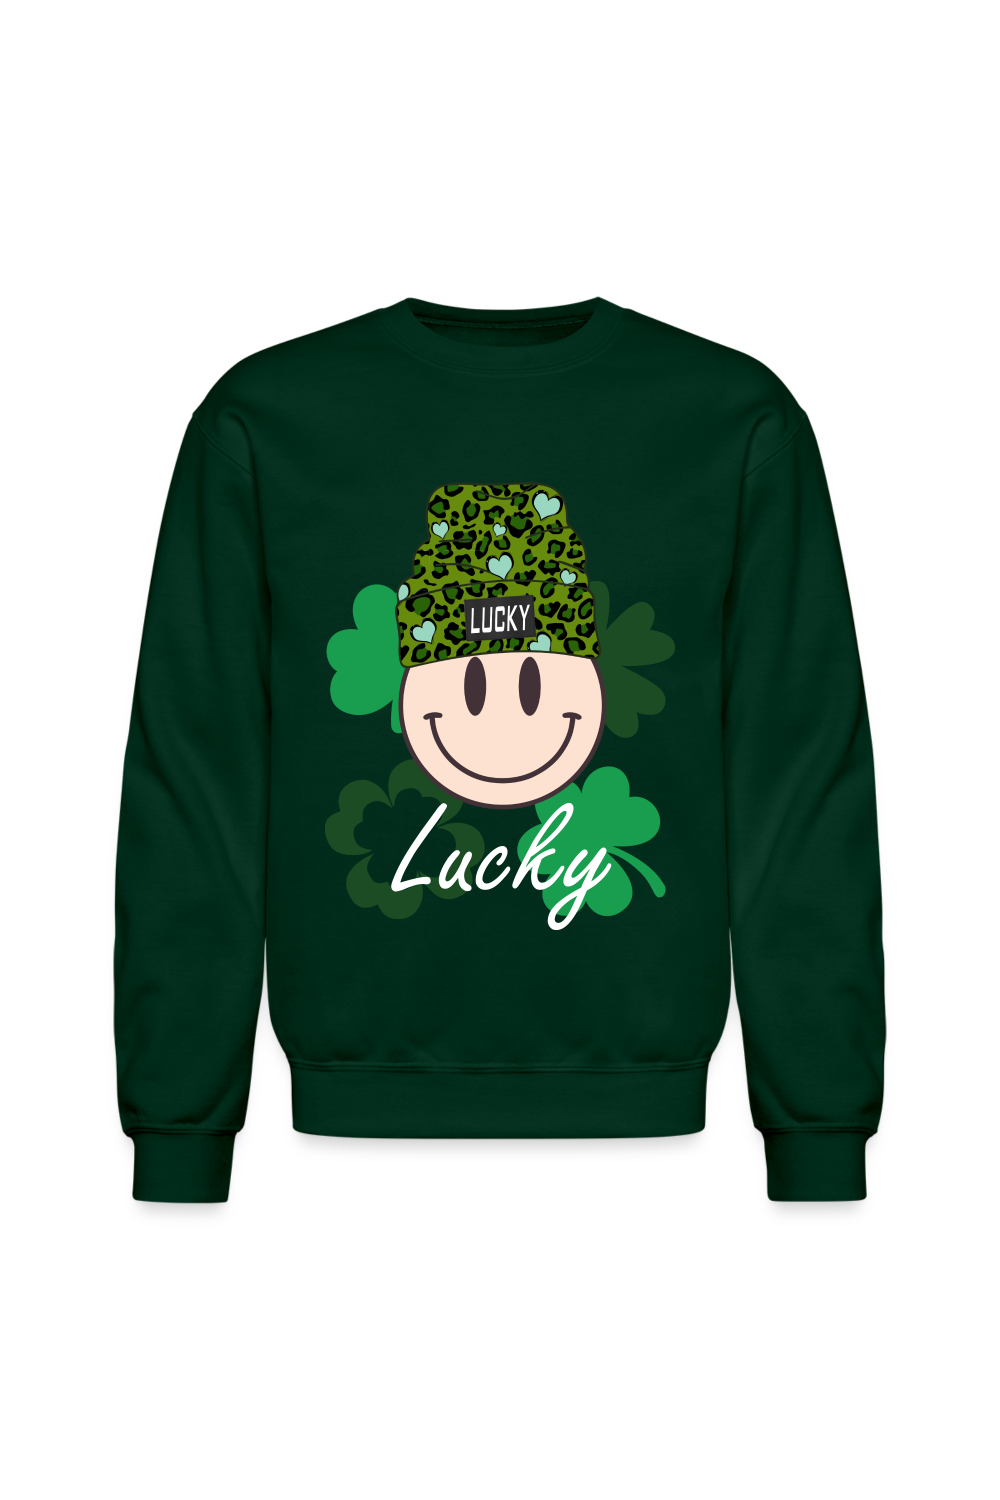 Women Lucky Smiley Face with Beanie Hat St. Patrick's Day Crewneck Long Sleeve Sweatshirt - forest green - NicholesGifts.online